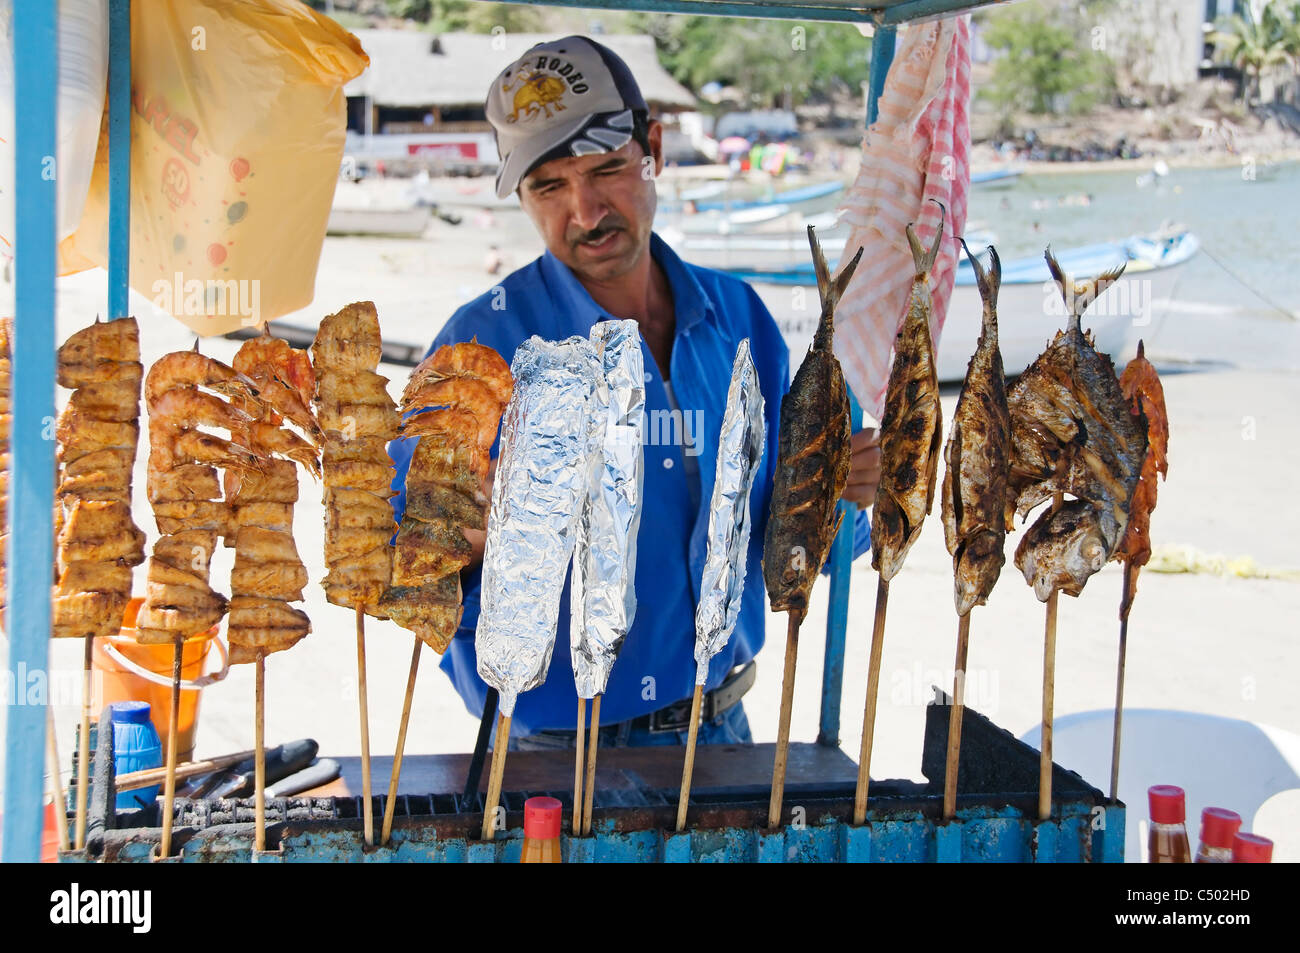 A man sells fresh, delicious barbecued shrimp and fish from a push cart on the beach in Rincon de Guayabitos, Nayarit, Mexico. Stock Photo